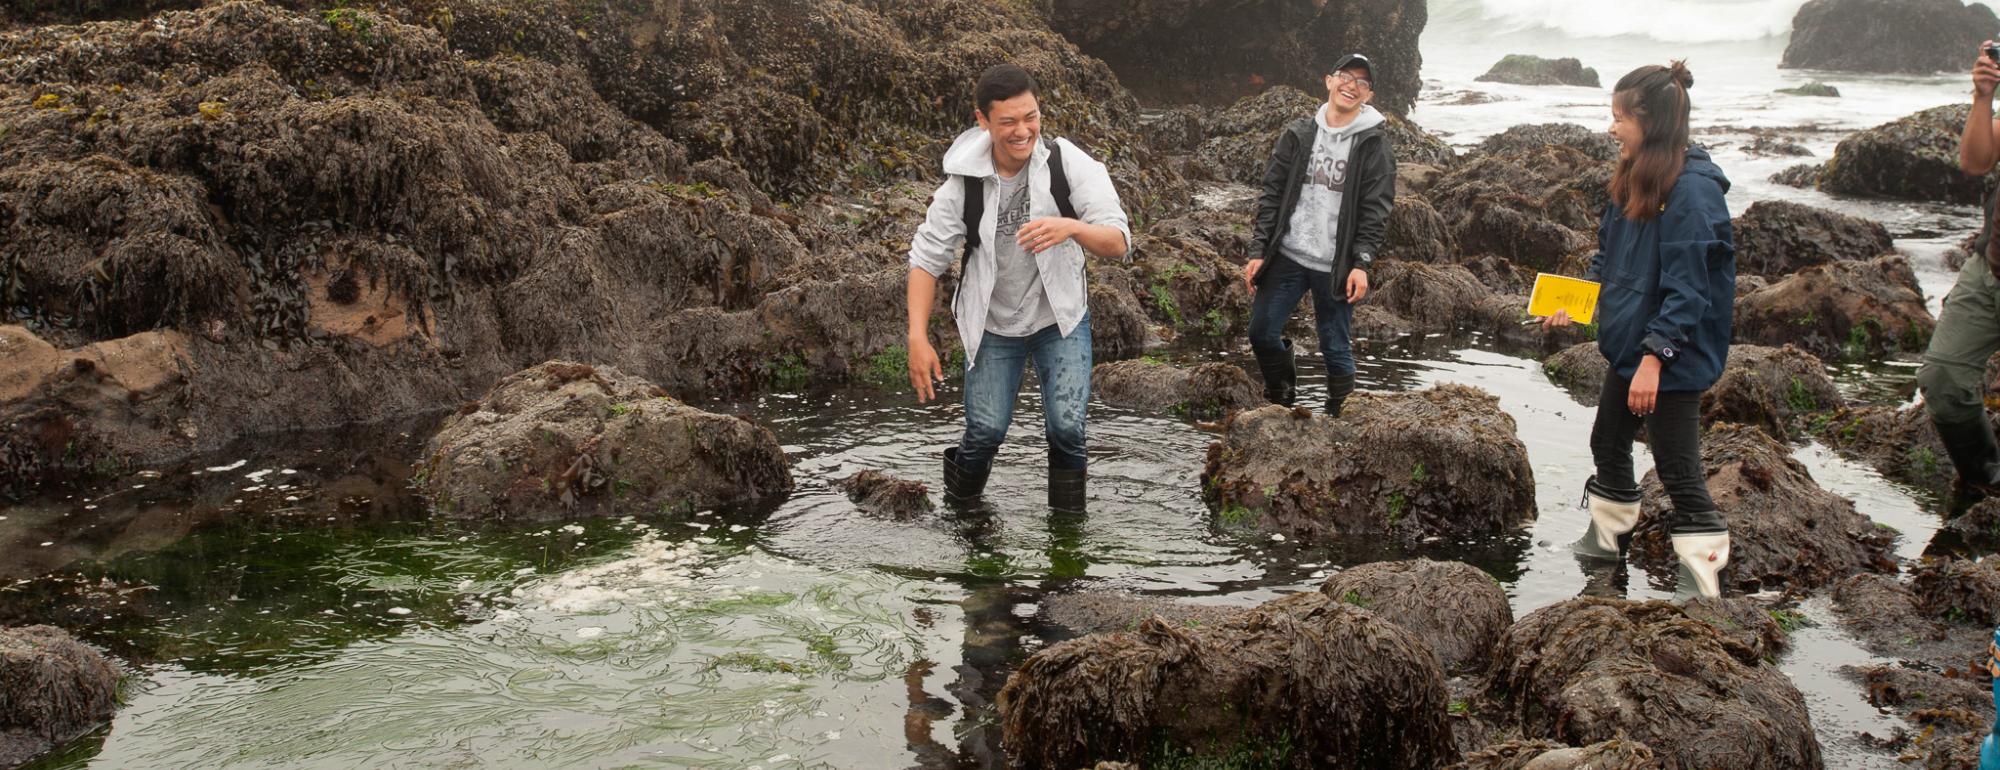 A student laughs as they step deep enough into a tidepool to flood their boots